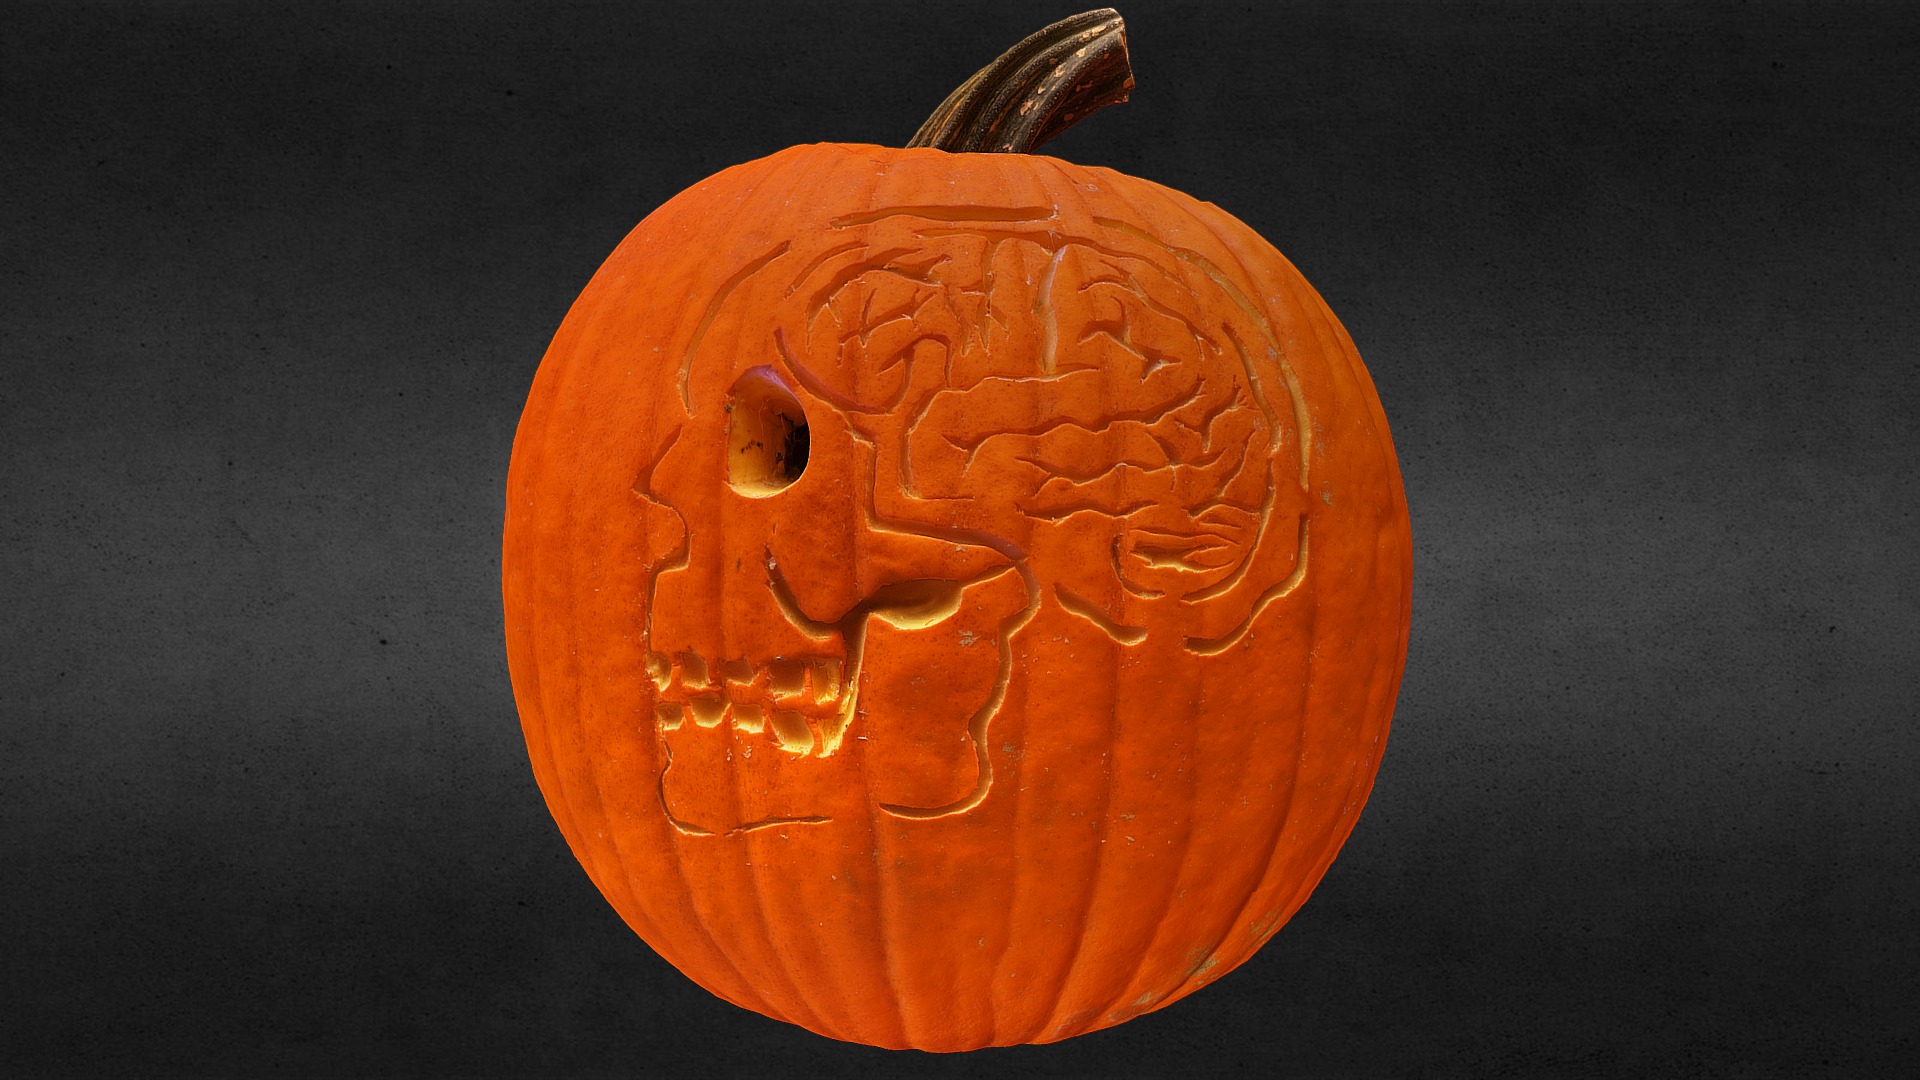 3D model Brain and Skull Jack-o-lantern - This is a 3D model of the Brain and Skull Jack-o-lantern. The 3D model is about a carved pumpkin with a face.